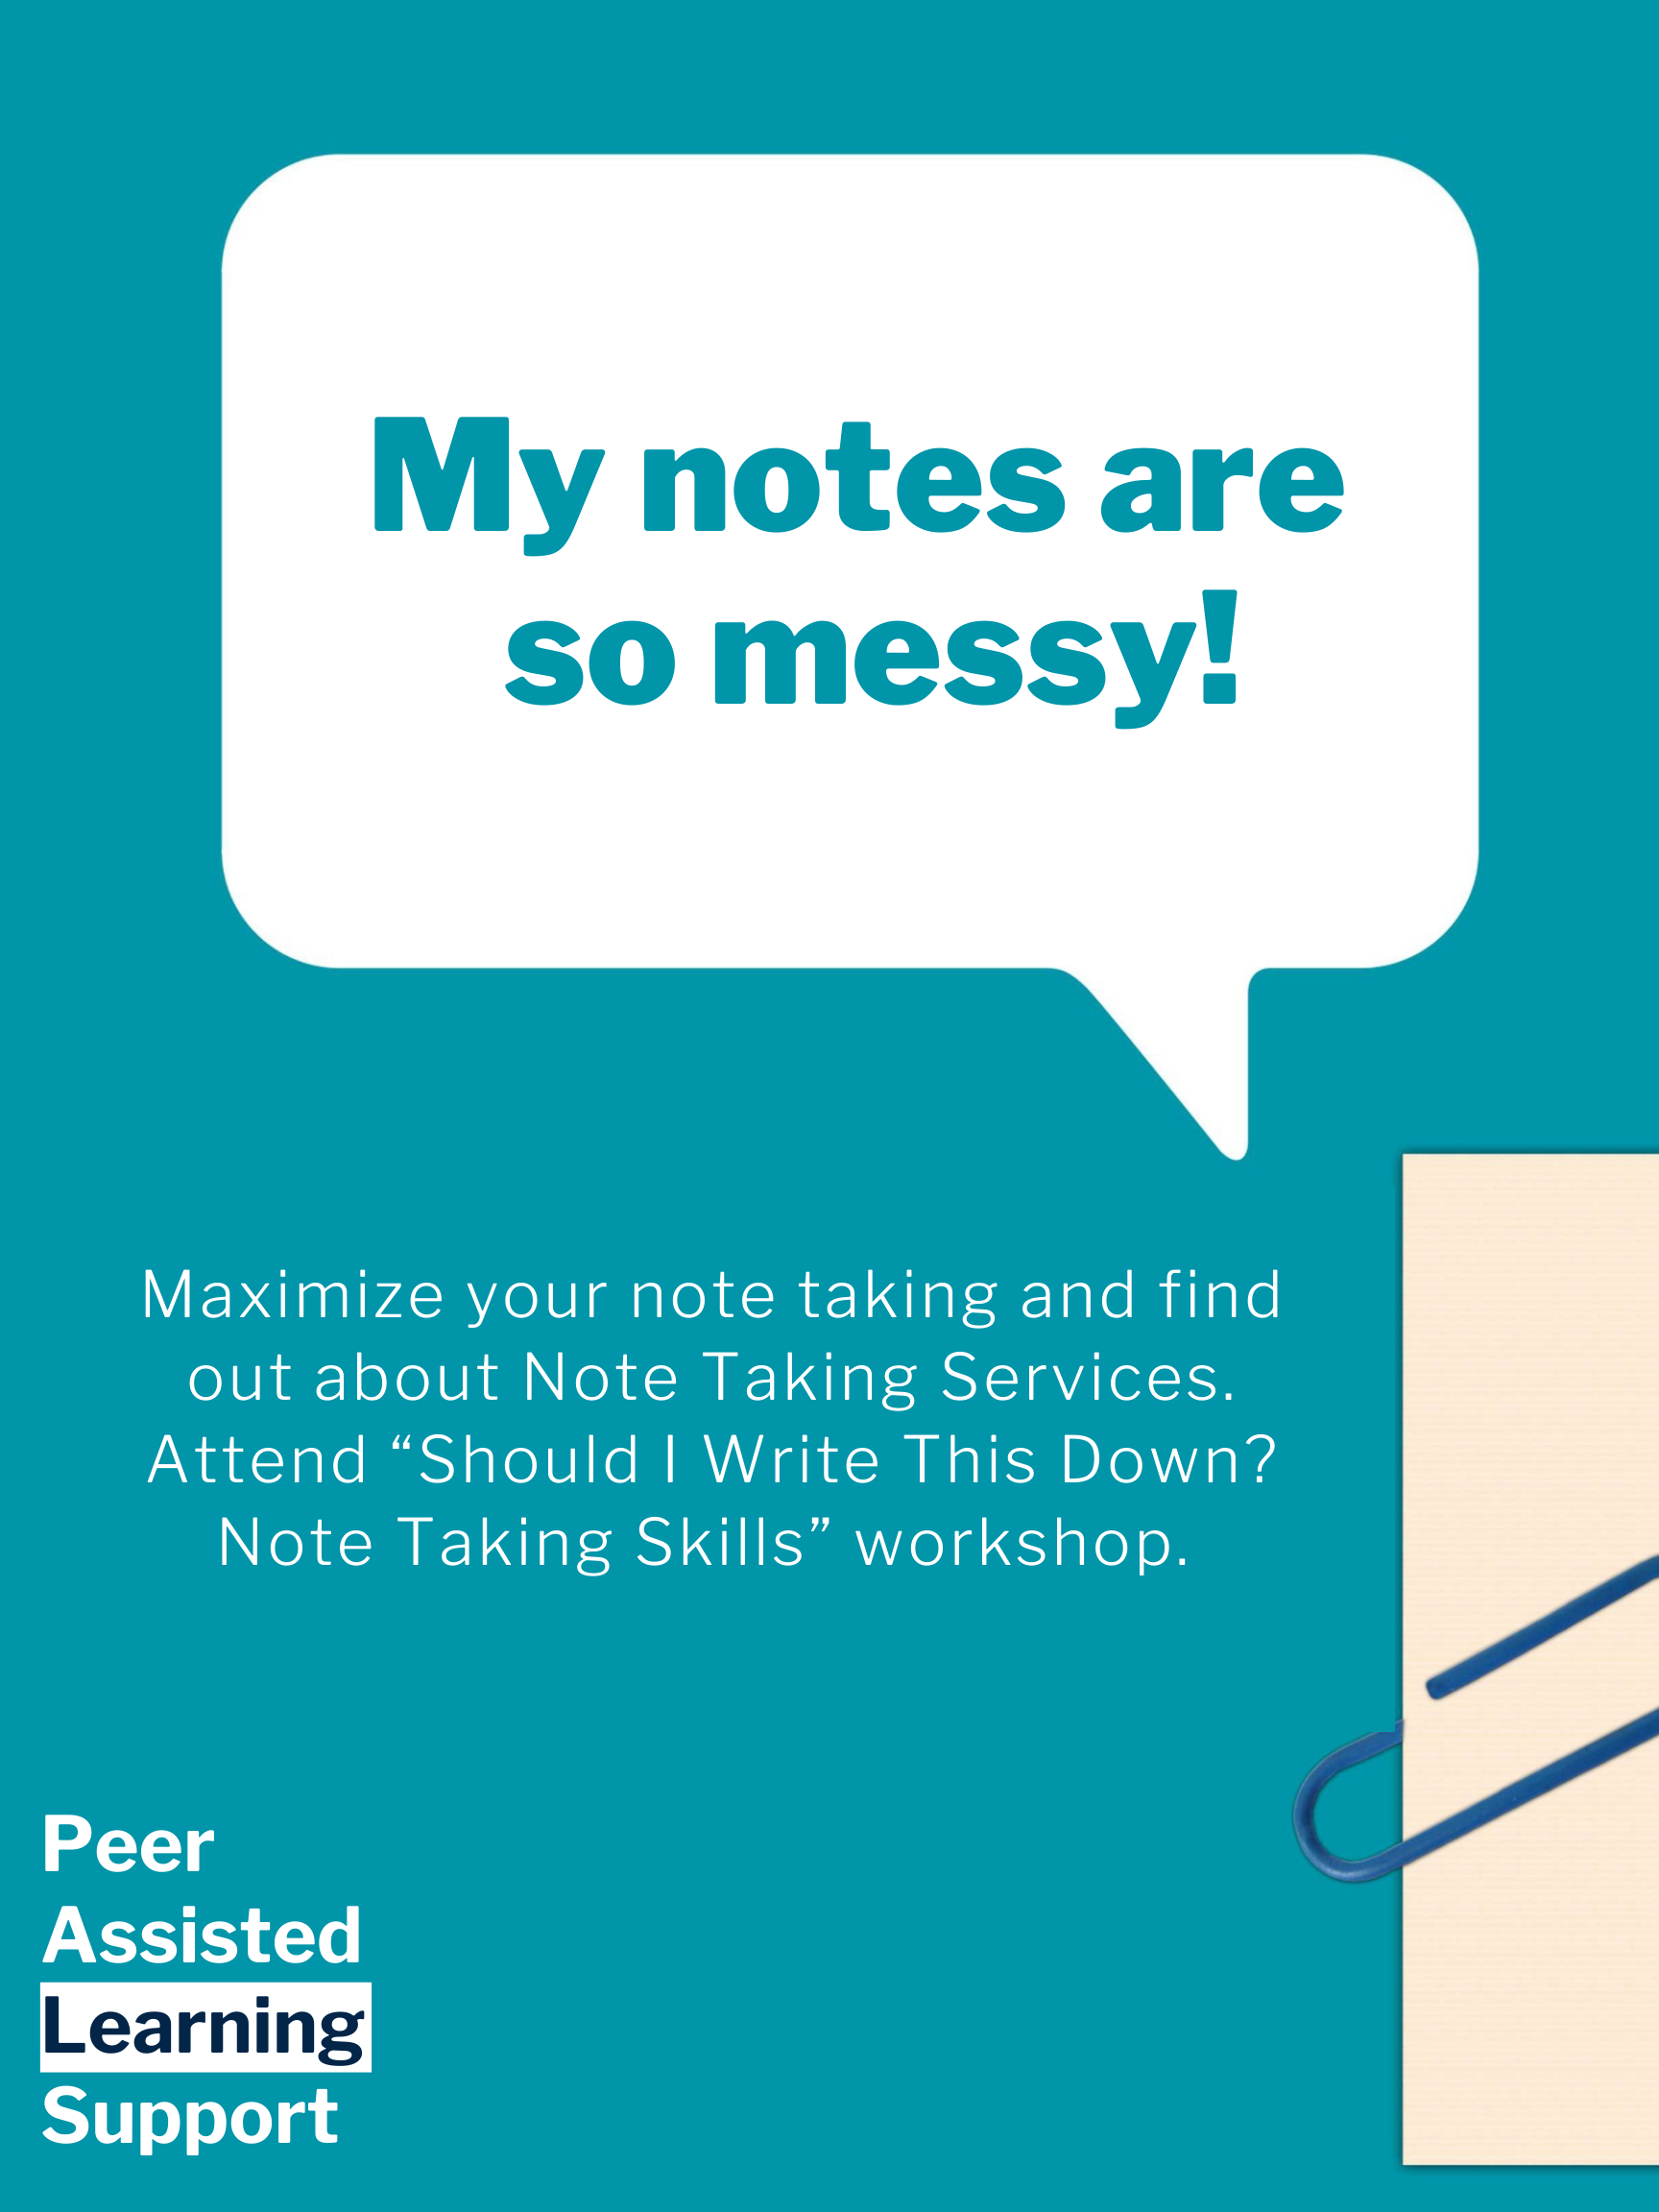 "My notes are so messy!" in a speech bubble